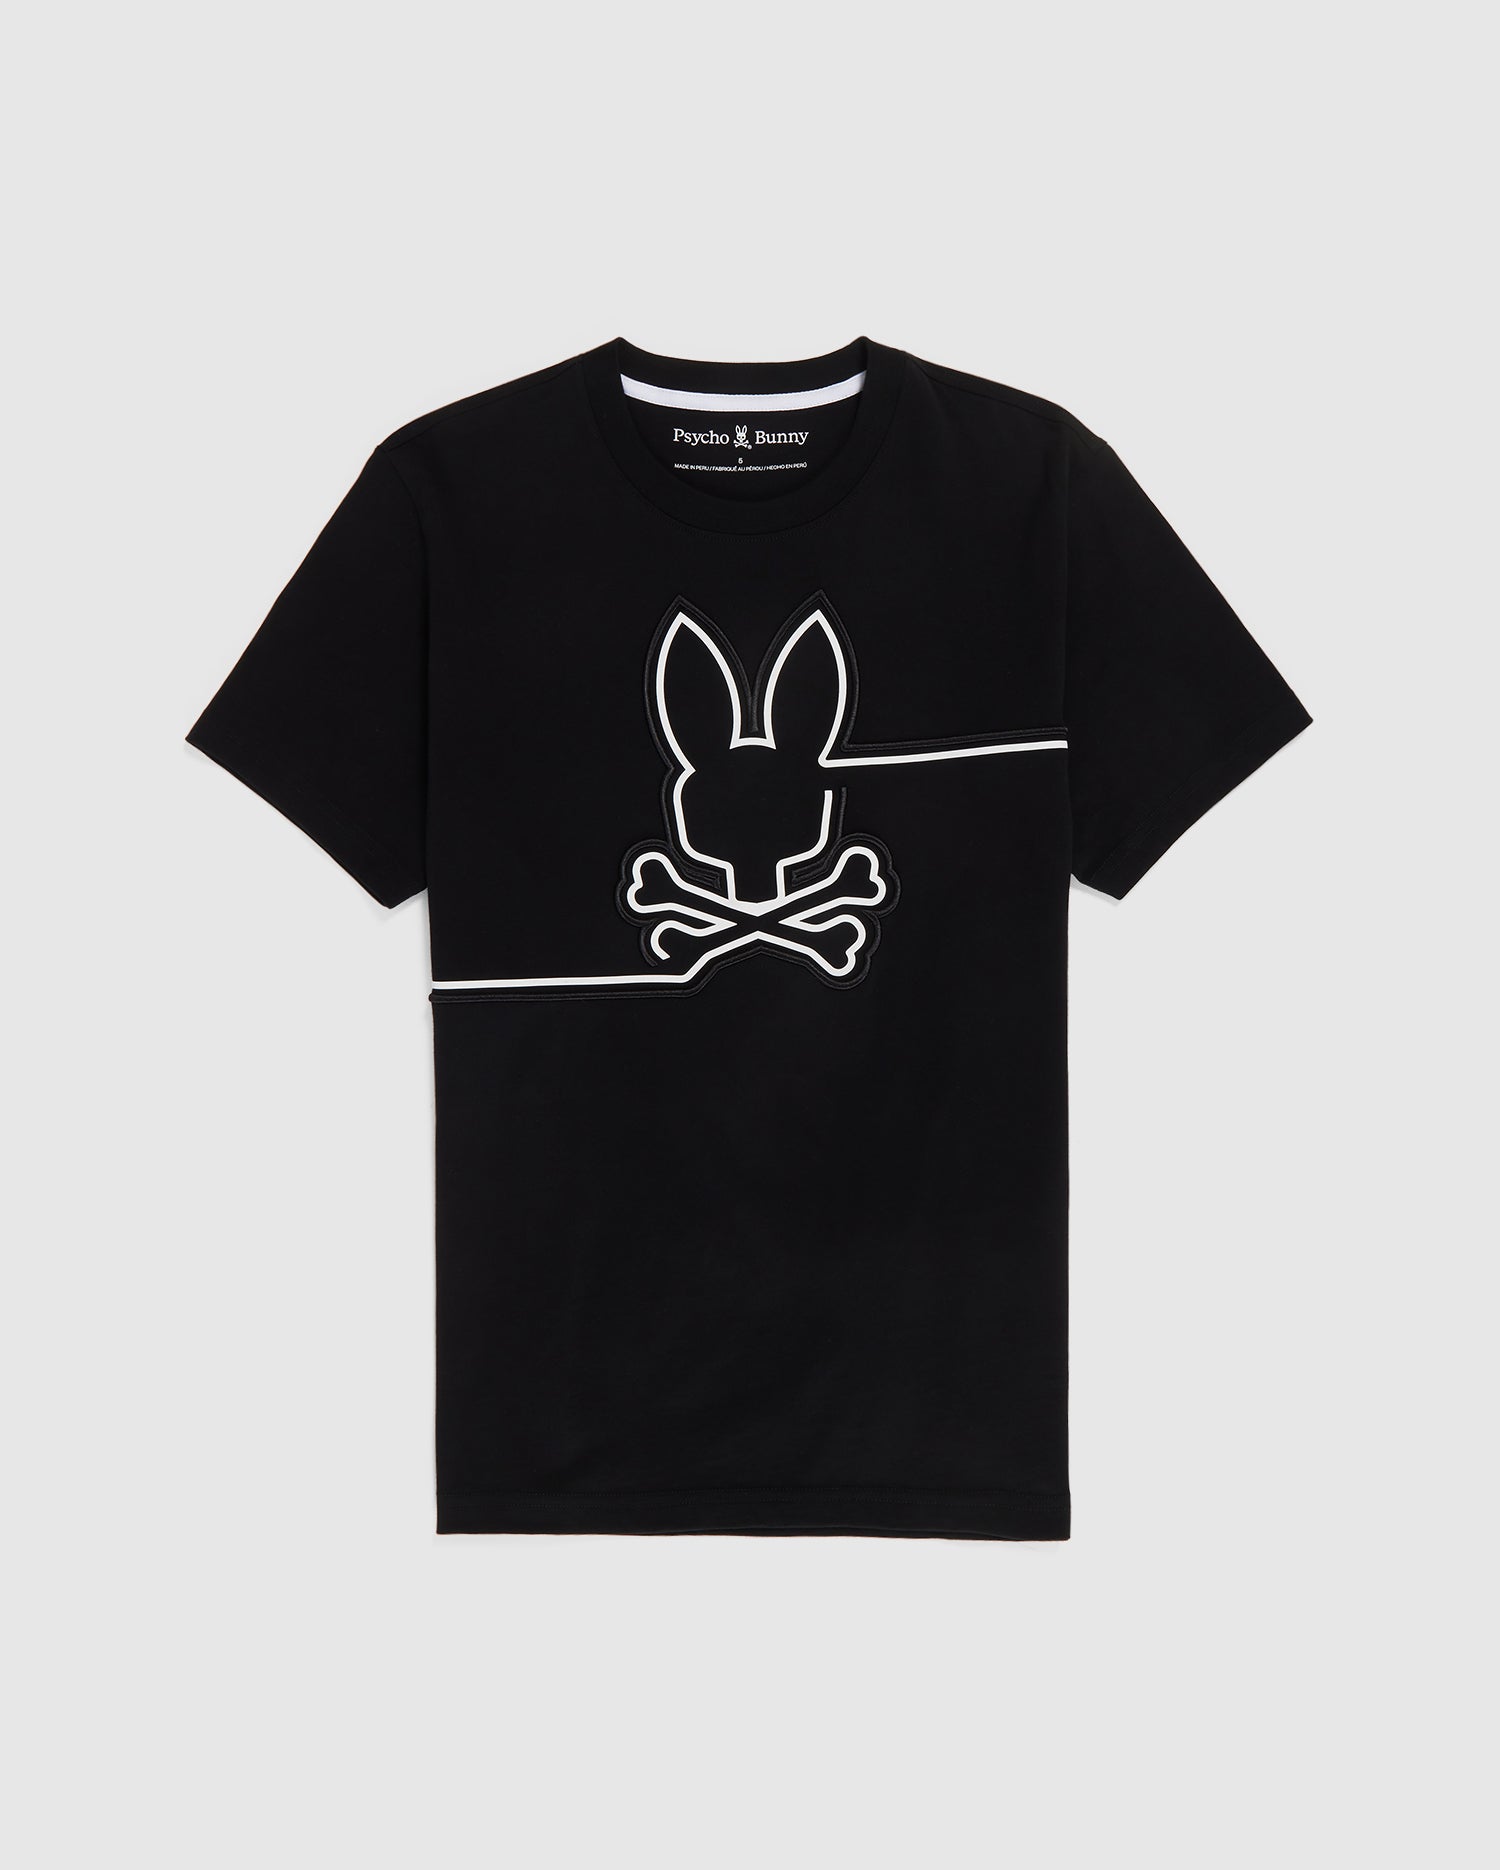 MENS BLACK CHESTER EMBROIDERED GRAPHIC TEE | PSYCHO BUNNY